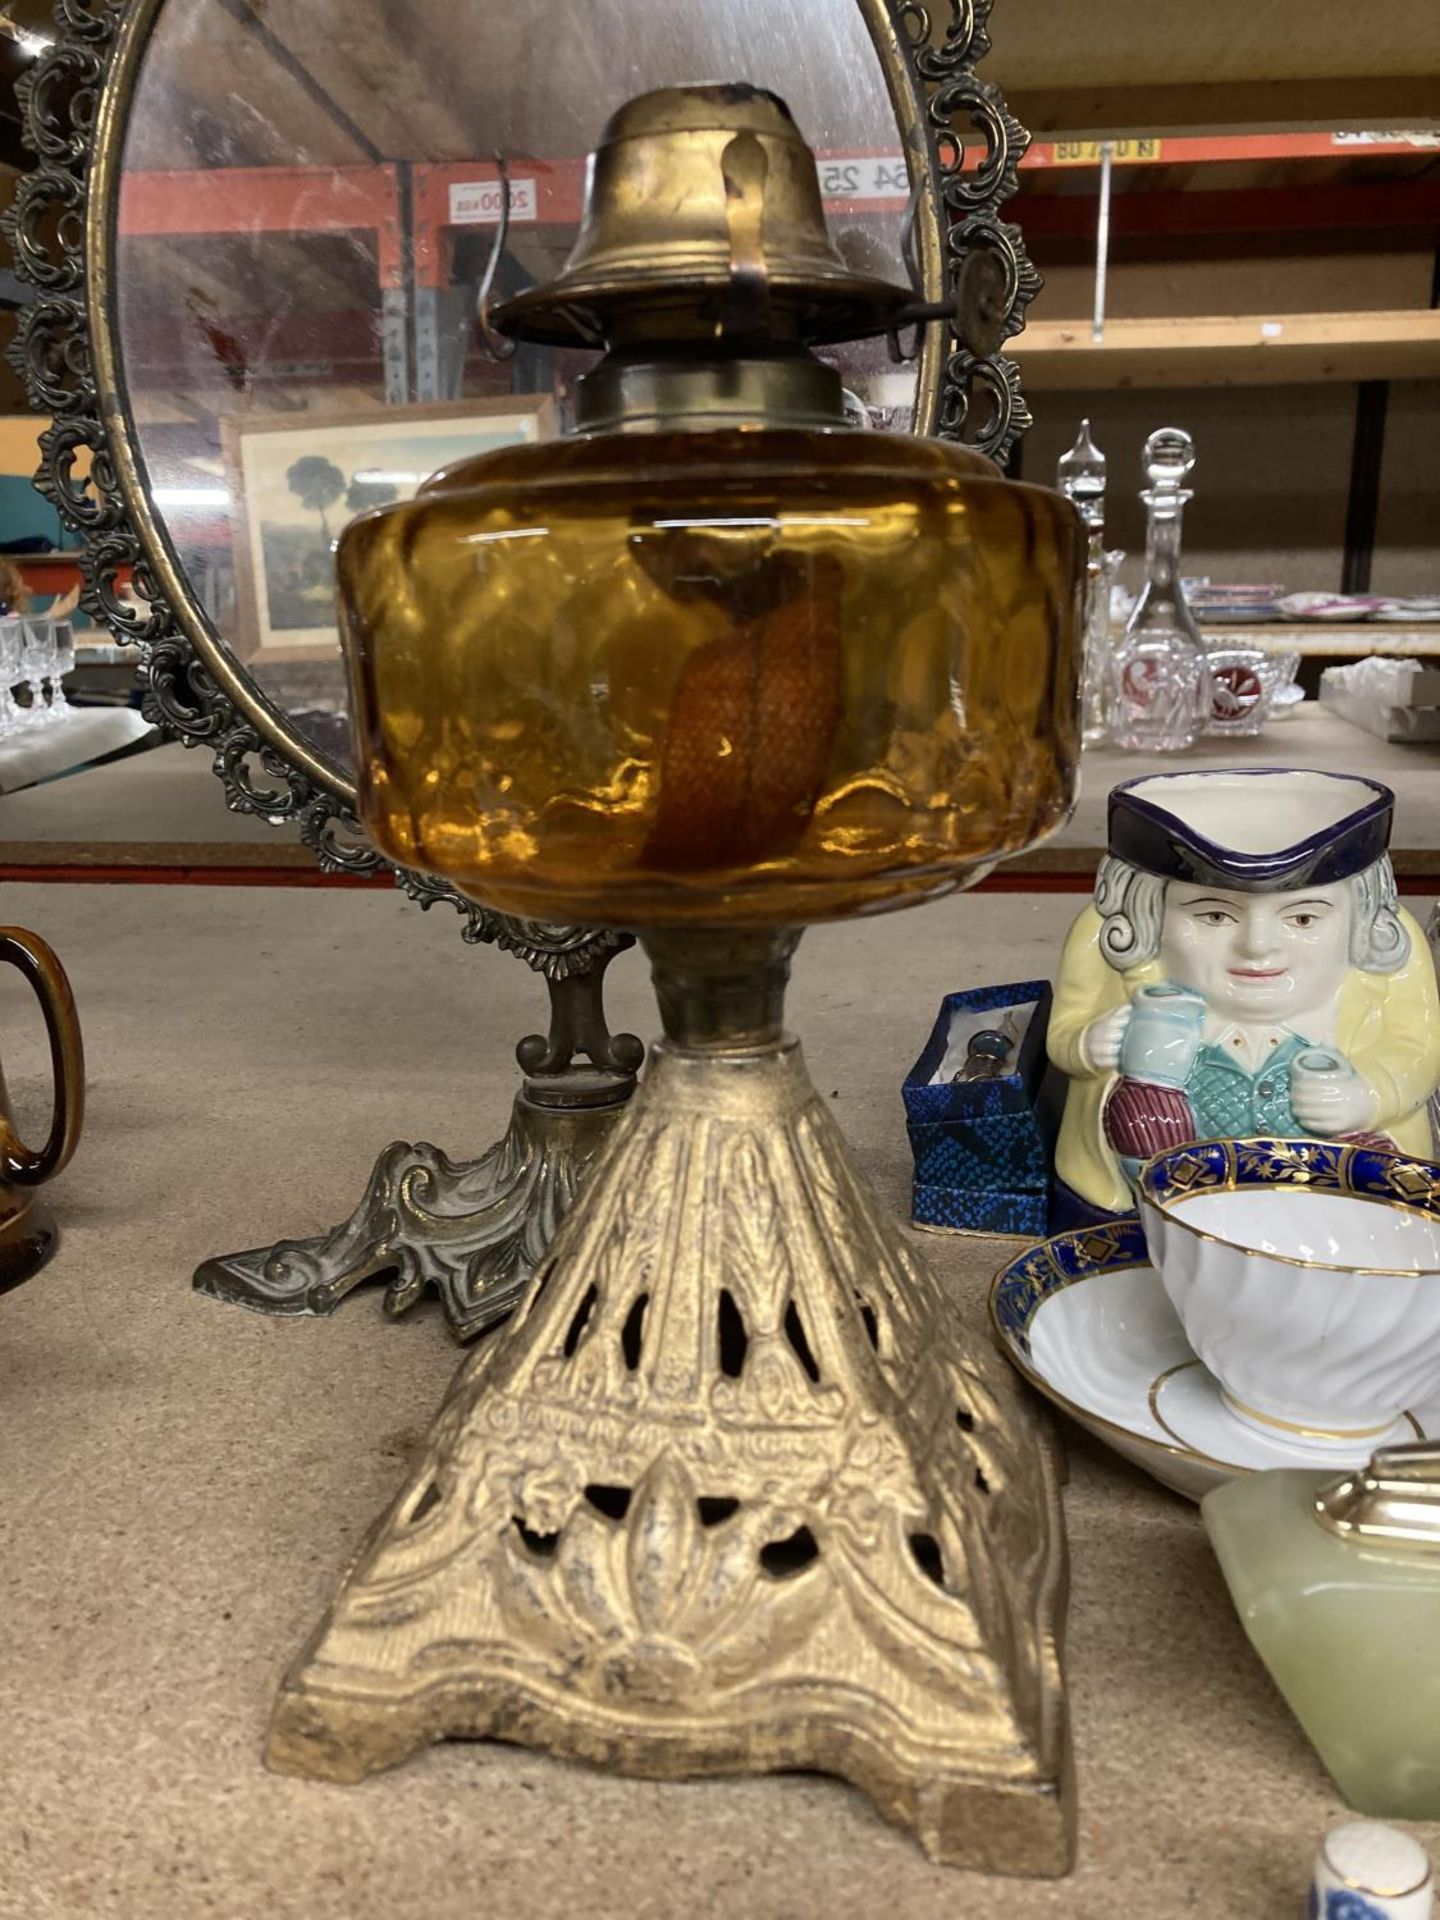 A VINTAGE OIL LAMP WITH AMBER GLASS RESERVOIR AND A DECORATIVE DRESSING TABLE MIRROR - Image 2 of 5